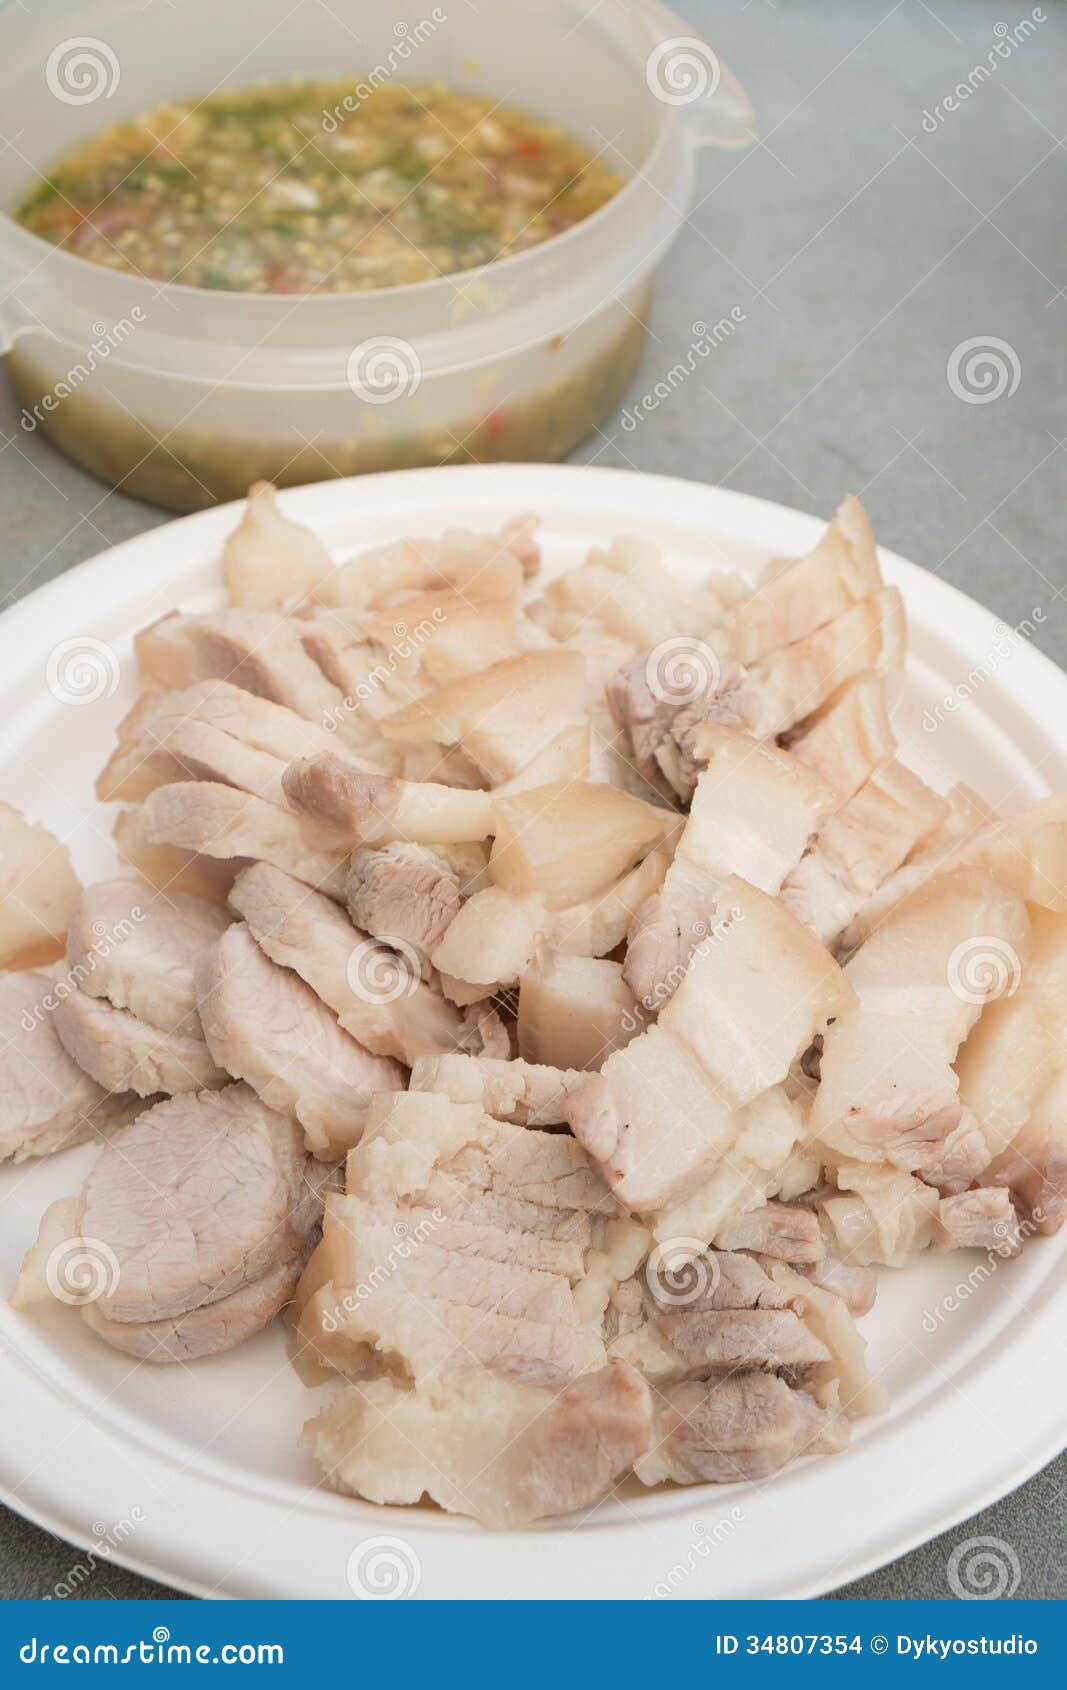 Boiled Pork Belly With Spicy Sauce Stock Images Image 34807354